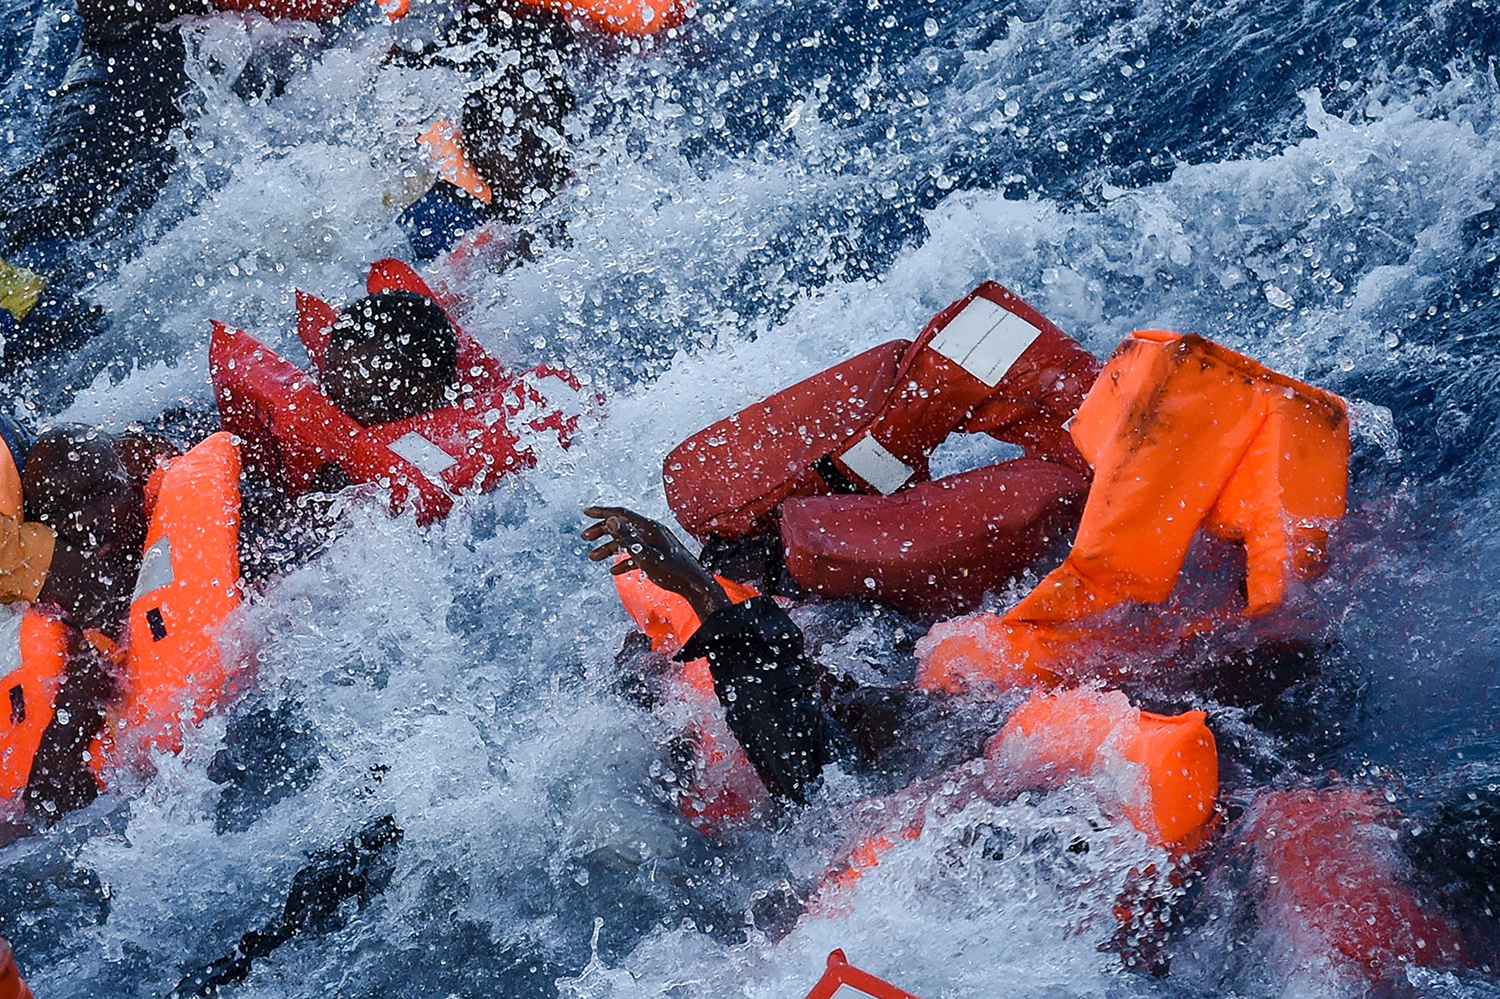 Migrants and refugees panic as they fall in the water during a rescue operation of the Topaz Responder rescue ship run by Maltese NGO Moas and Italian Red Cross, off the Libyan coast in the Mediterranean Sea, on November 3, 2016. / AFP PHOTO / ANDREAS SOLARO / TT / kod 444